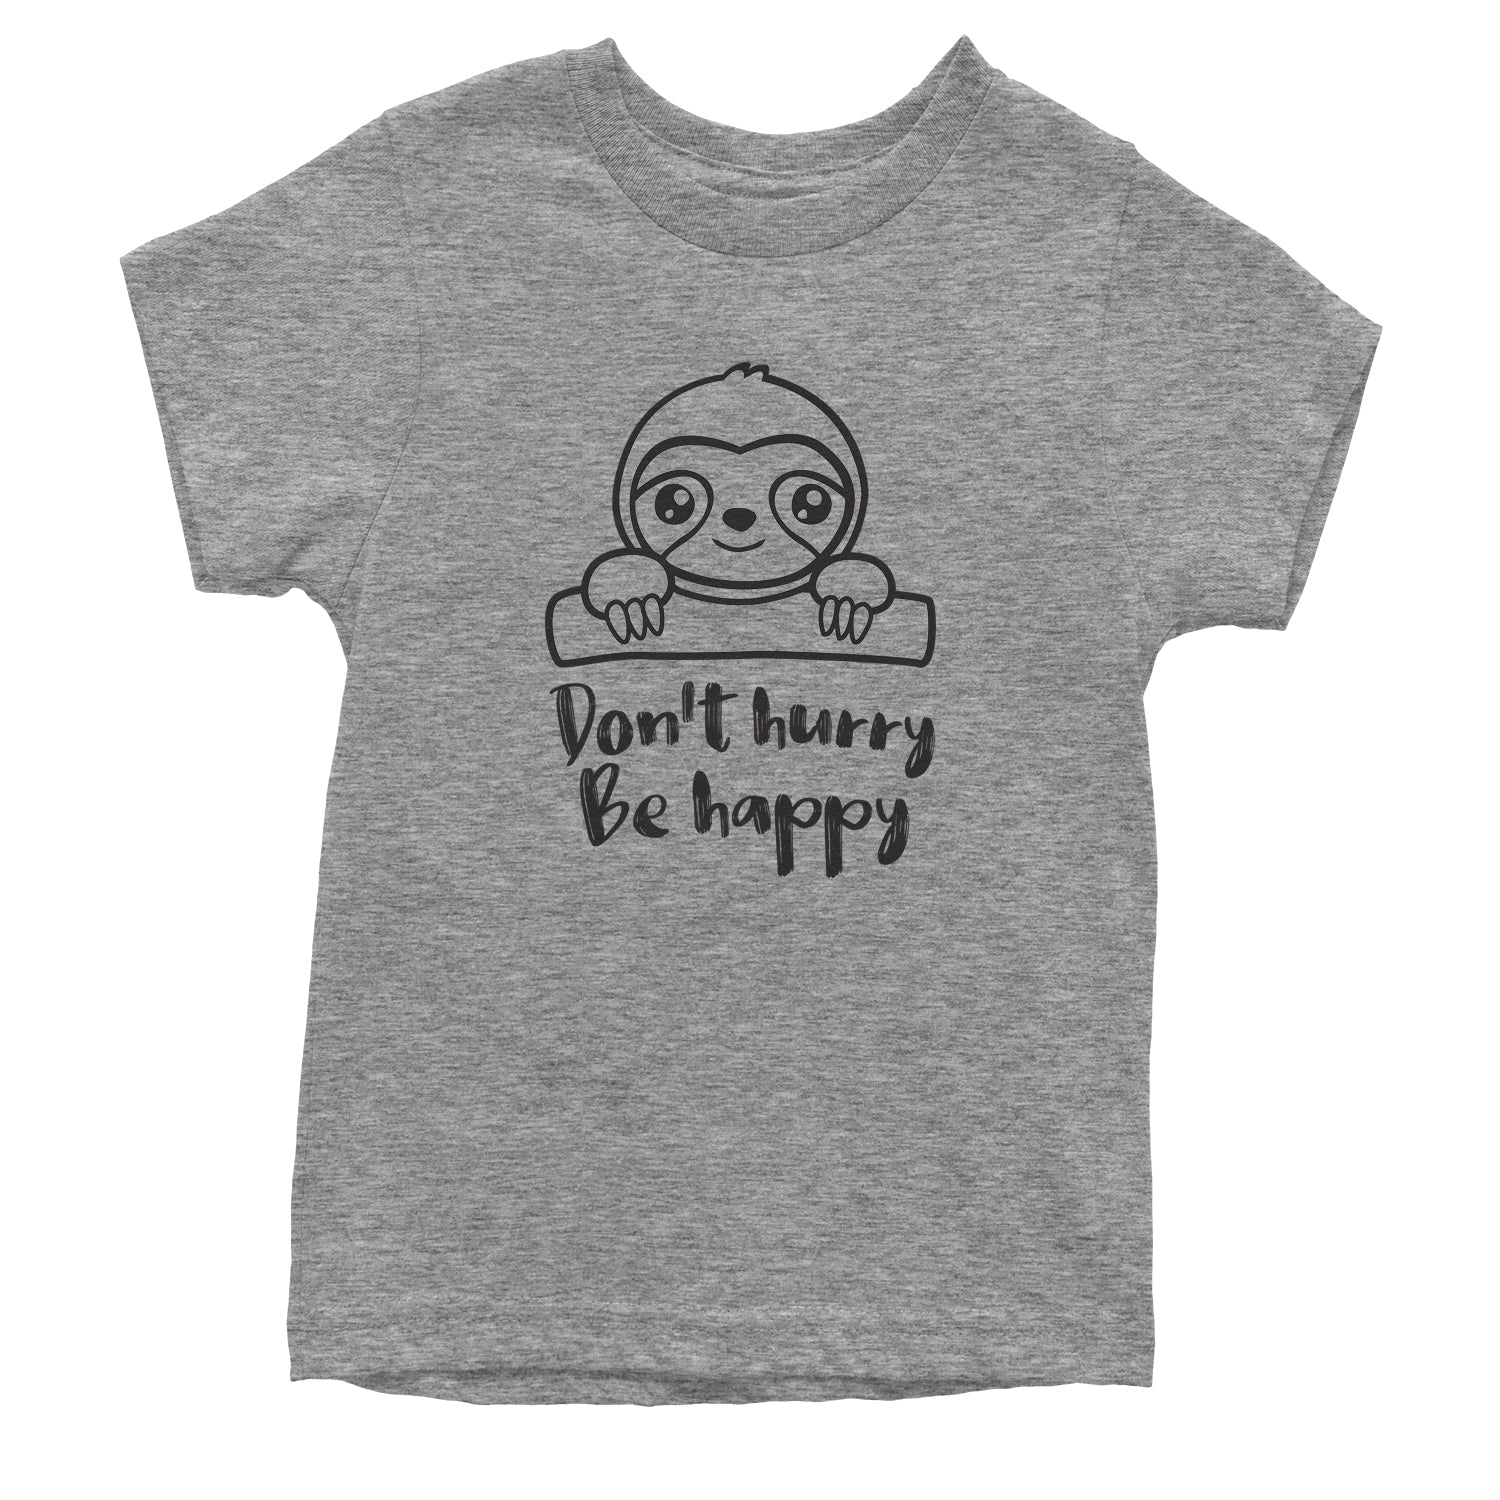 Sloth Don't Hurry Be Happy Youth T-shirt fun, funny, sloth, sloths by Expression Tees